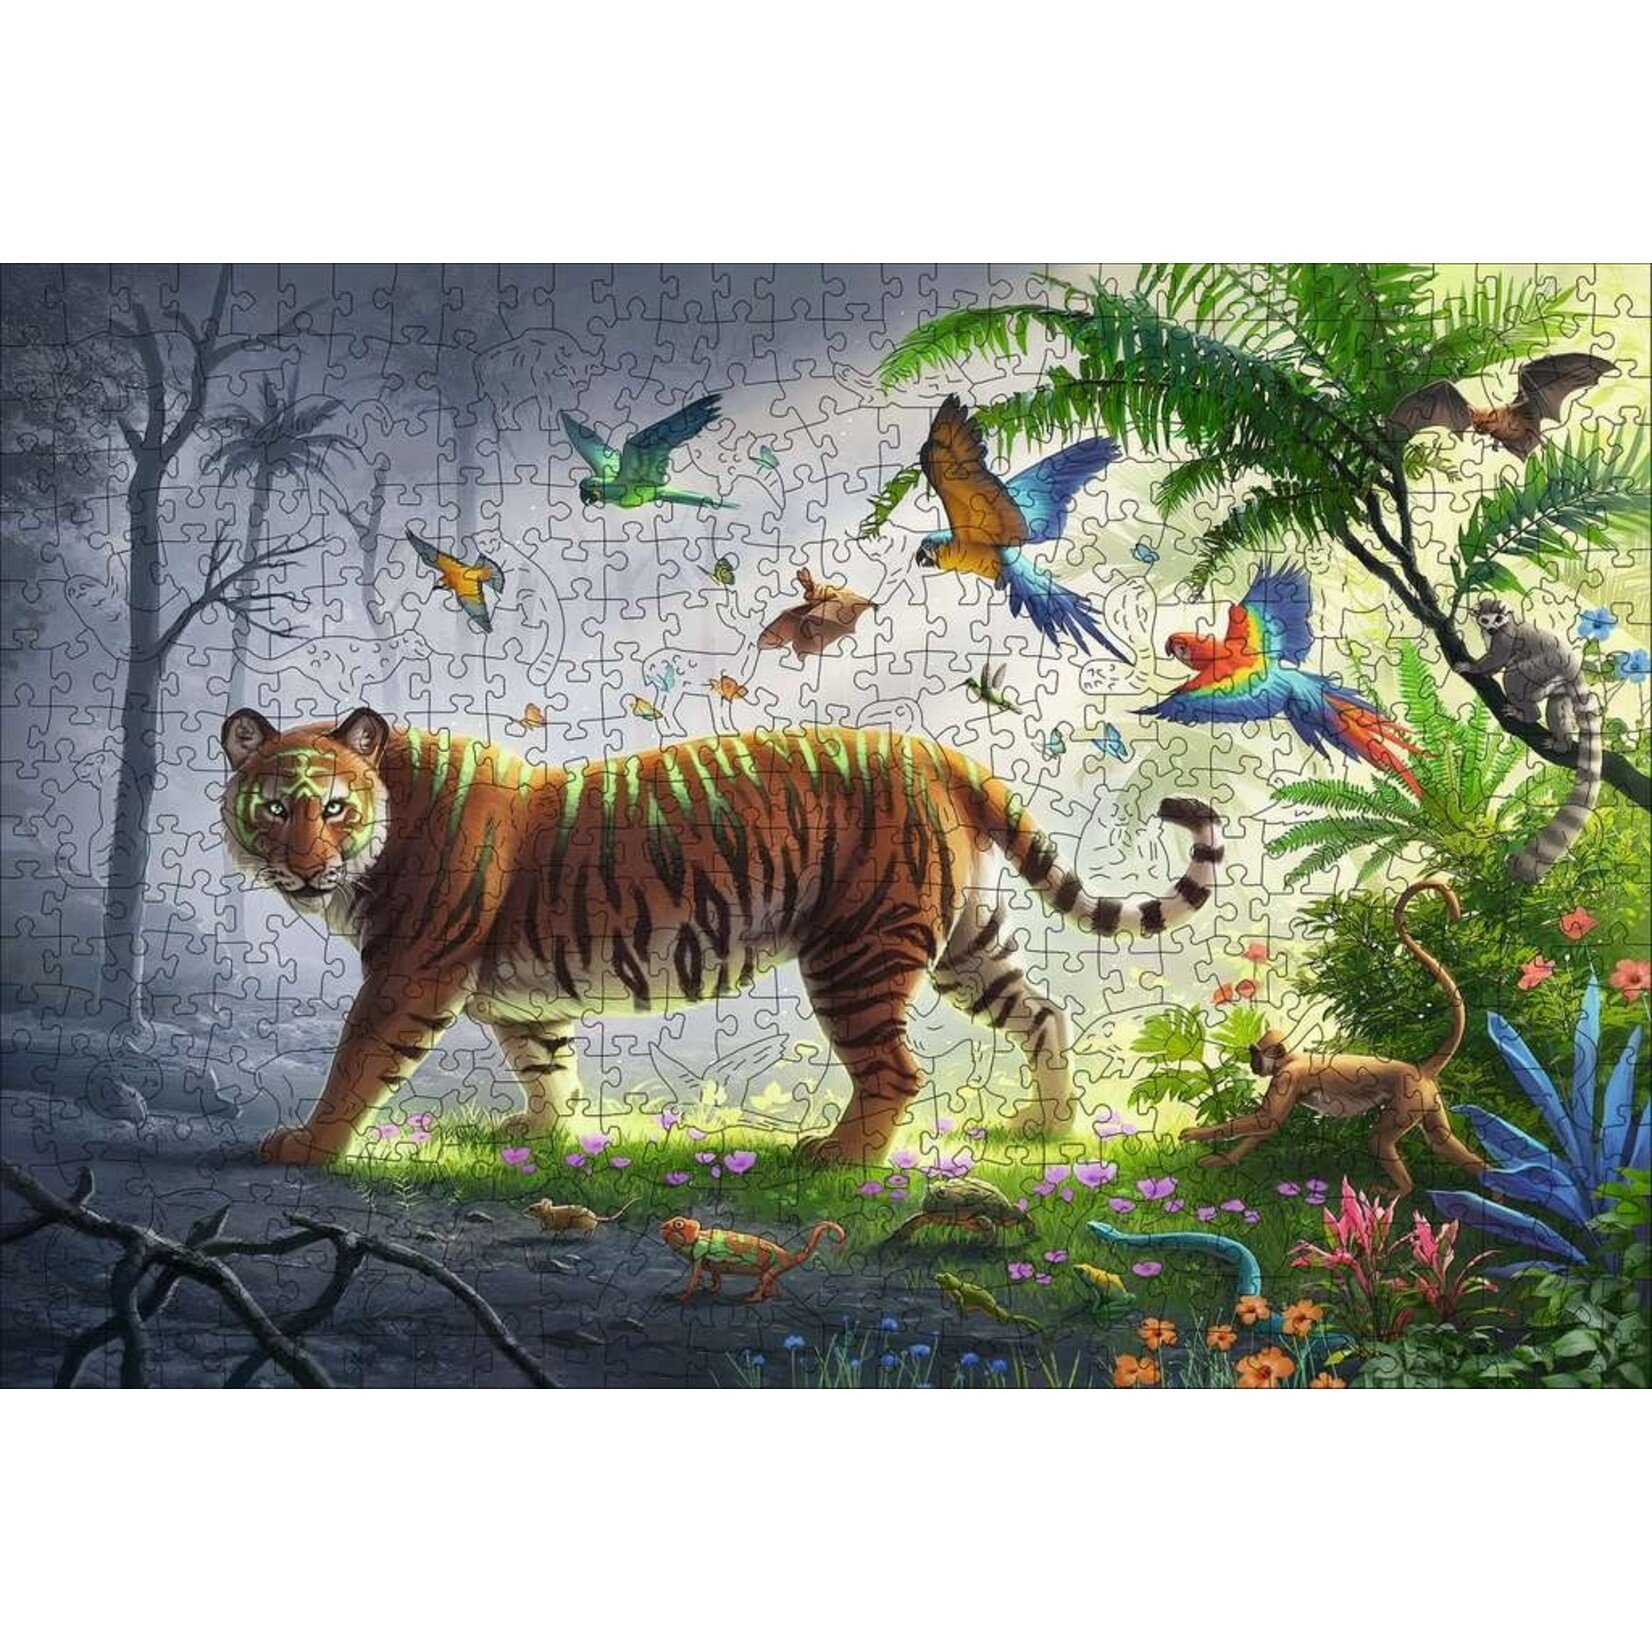 WOOD: Jungle Tiger 500 Piece Wooden Puzzle